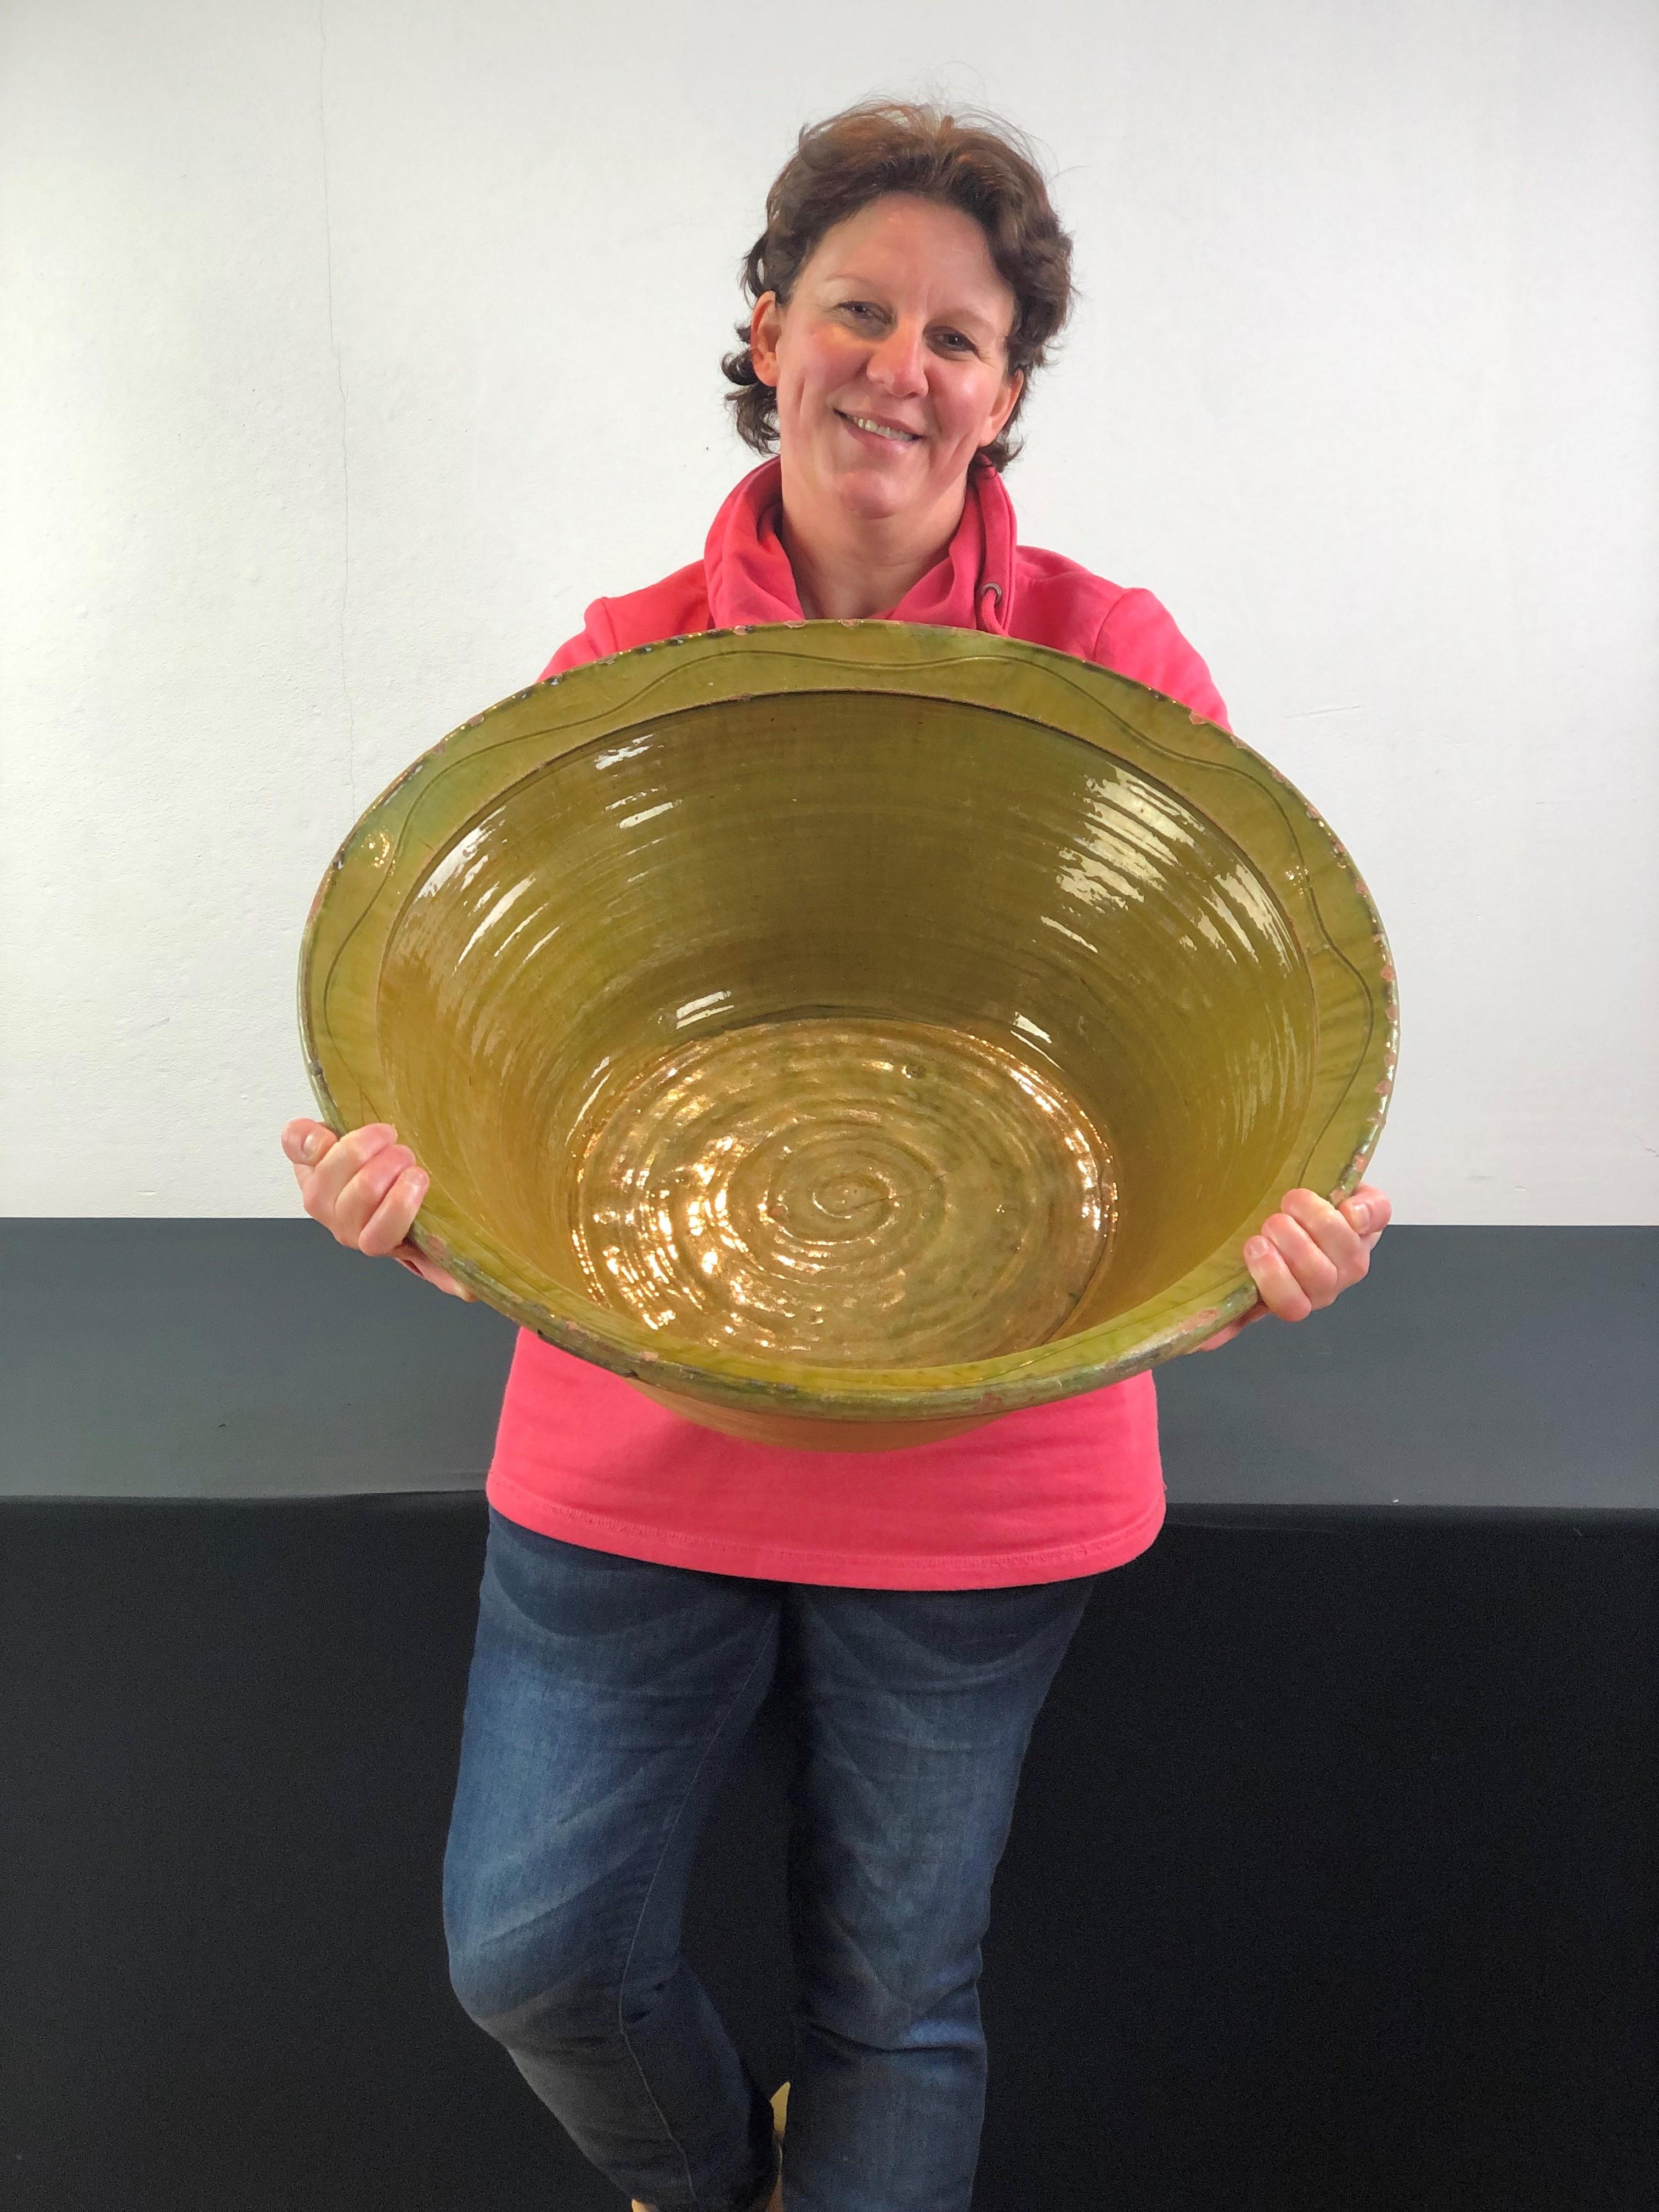 Great looking large green glazed terracotta olive bowl. 
Awesome by his large size and by the color ! 

This old Spanish terracotta bowl was used to display olives. 
It has a beautiful green color - olive green color with a touch of dark lemongreen